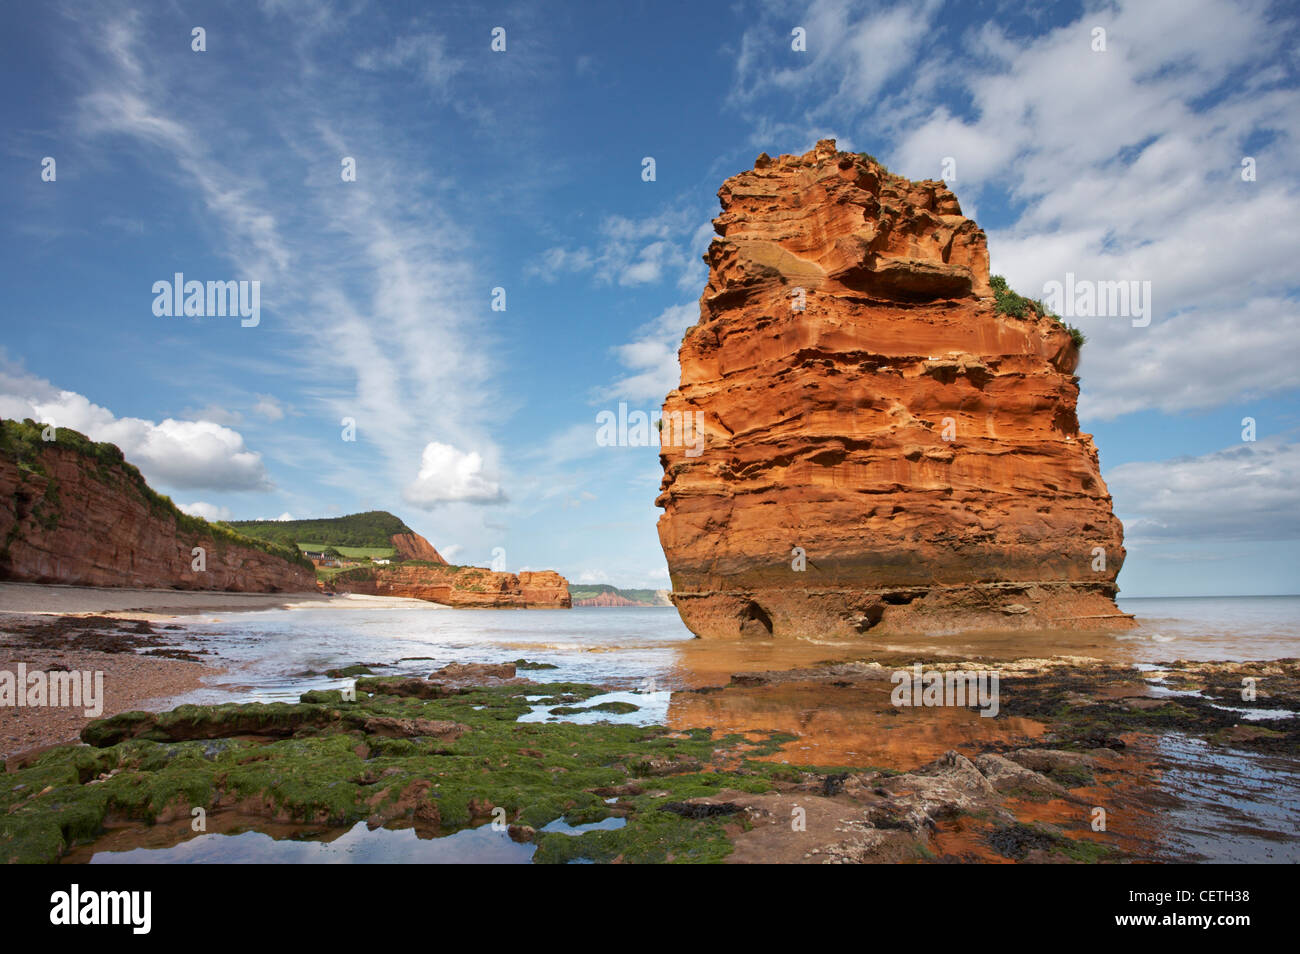 A stack at Ladram Bay. Part of the World Heritage coast, the stacks have been formed from caves eaten away by the sea to produce Stock Photo